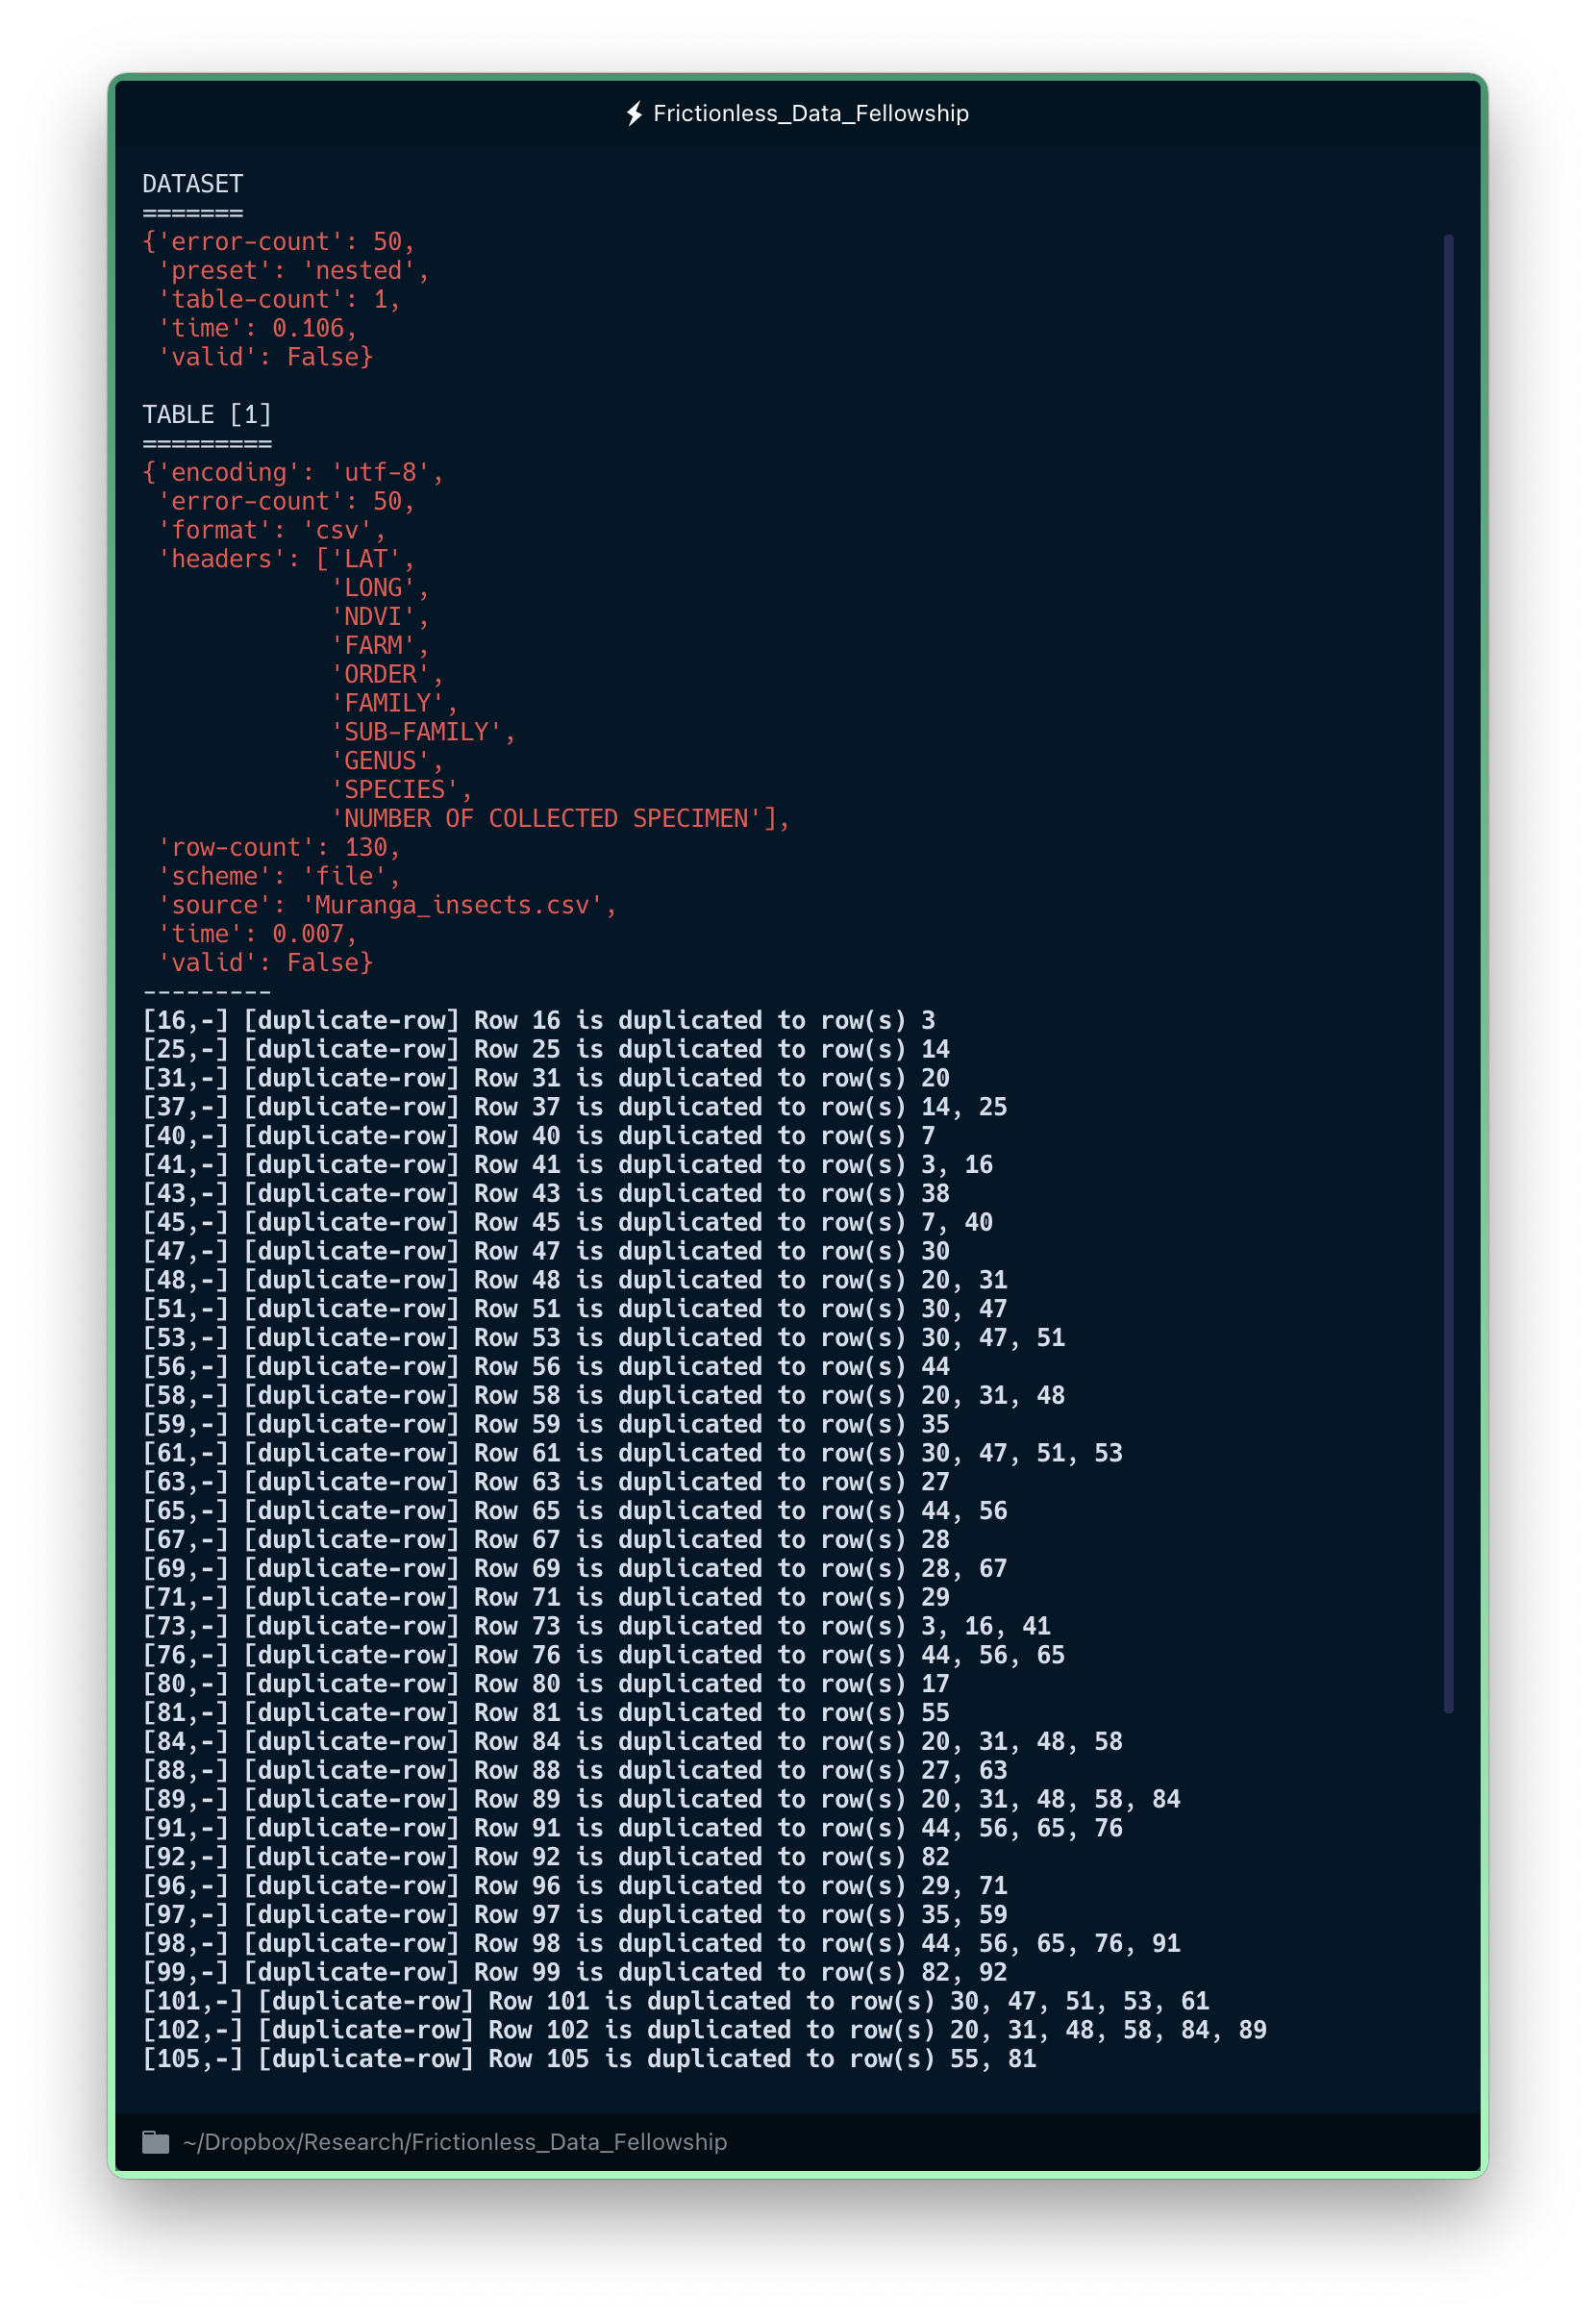 Output from the 'goodtables' command-line tool on a tabular CSV data file